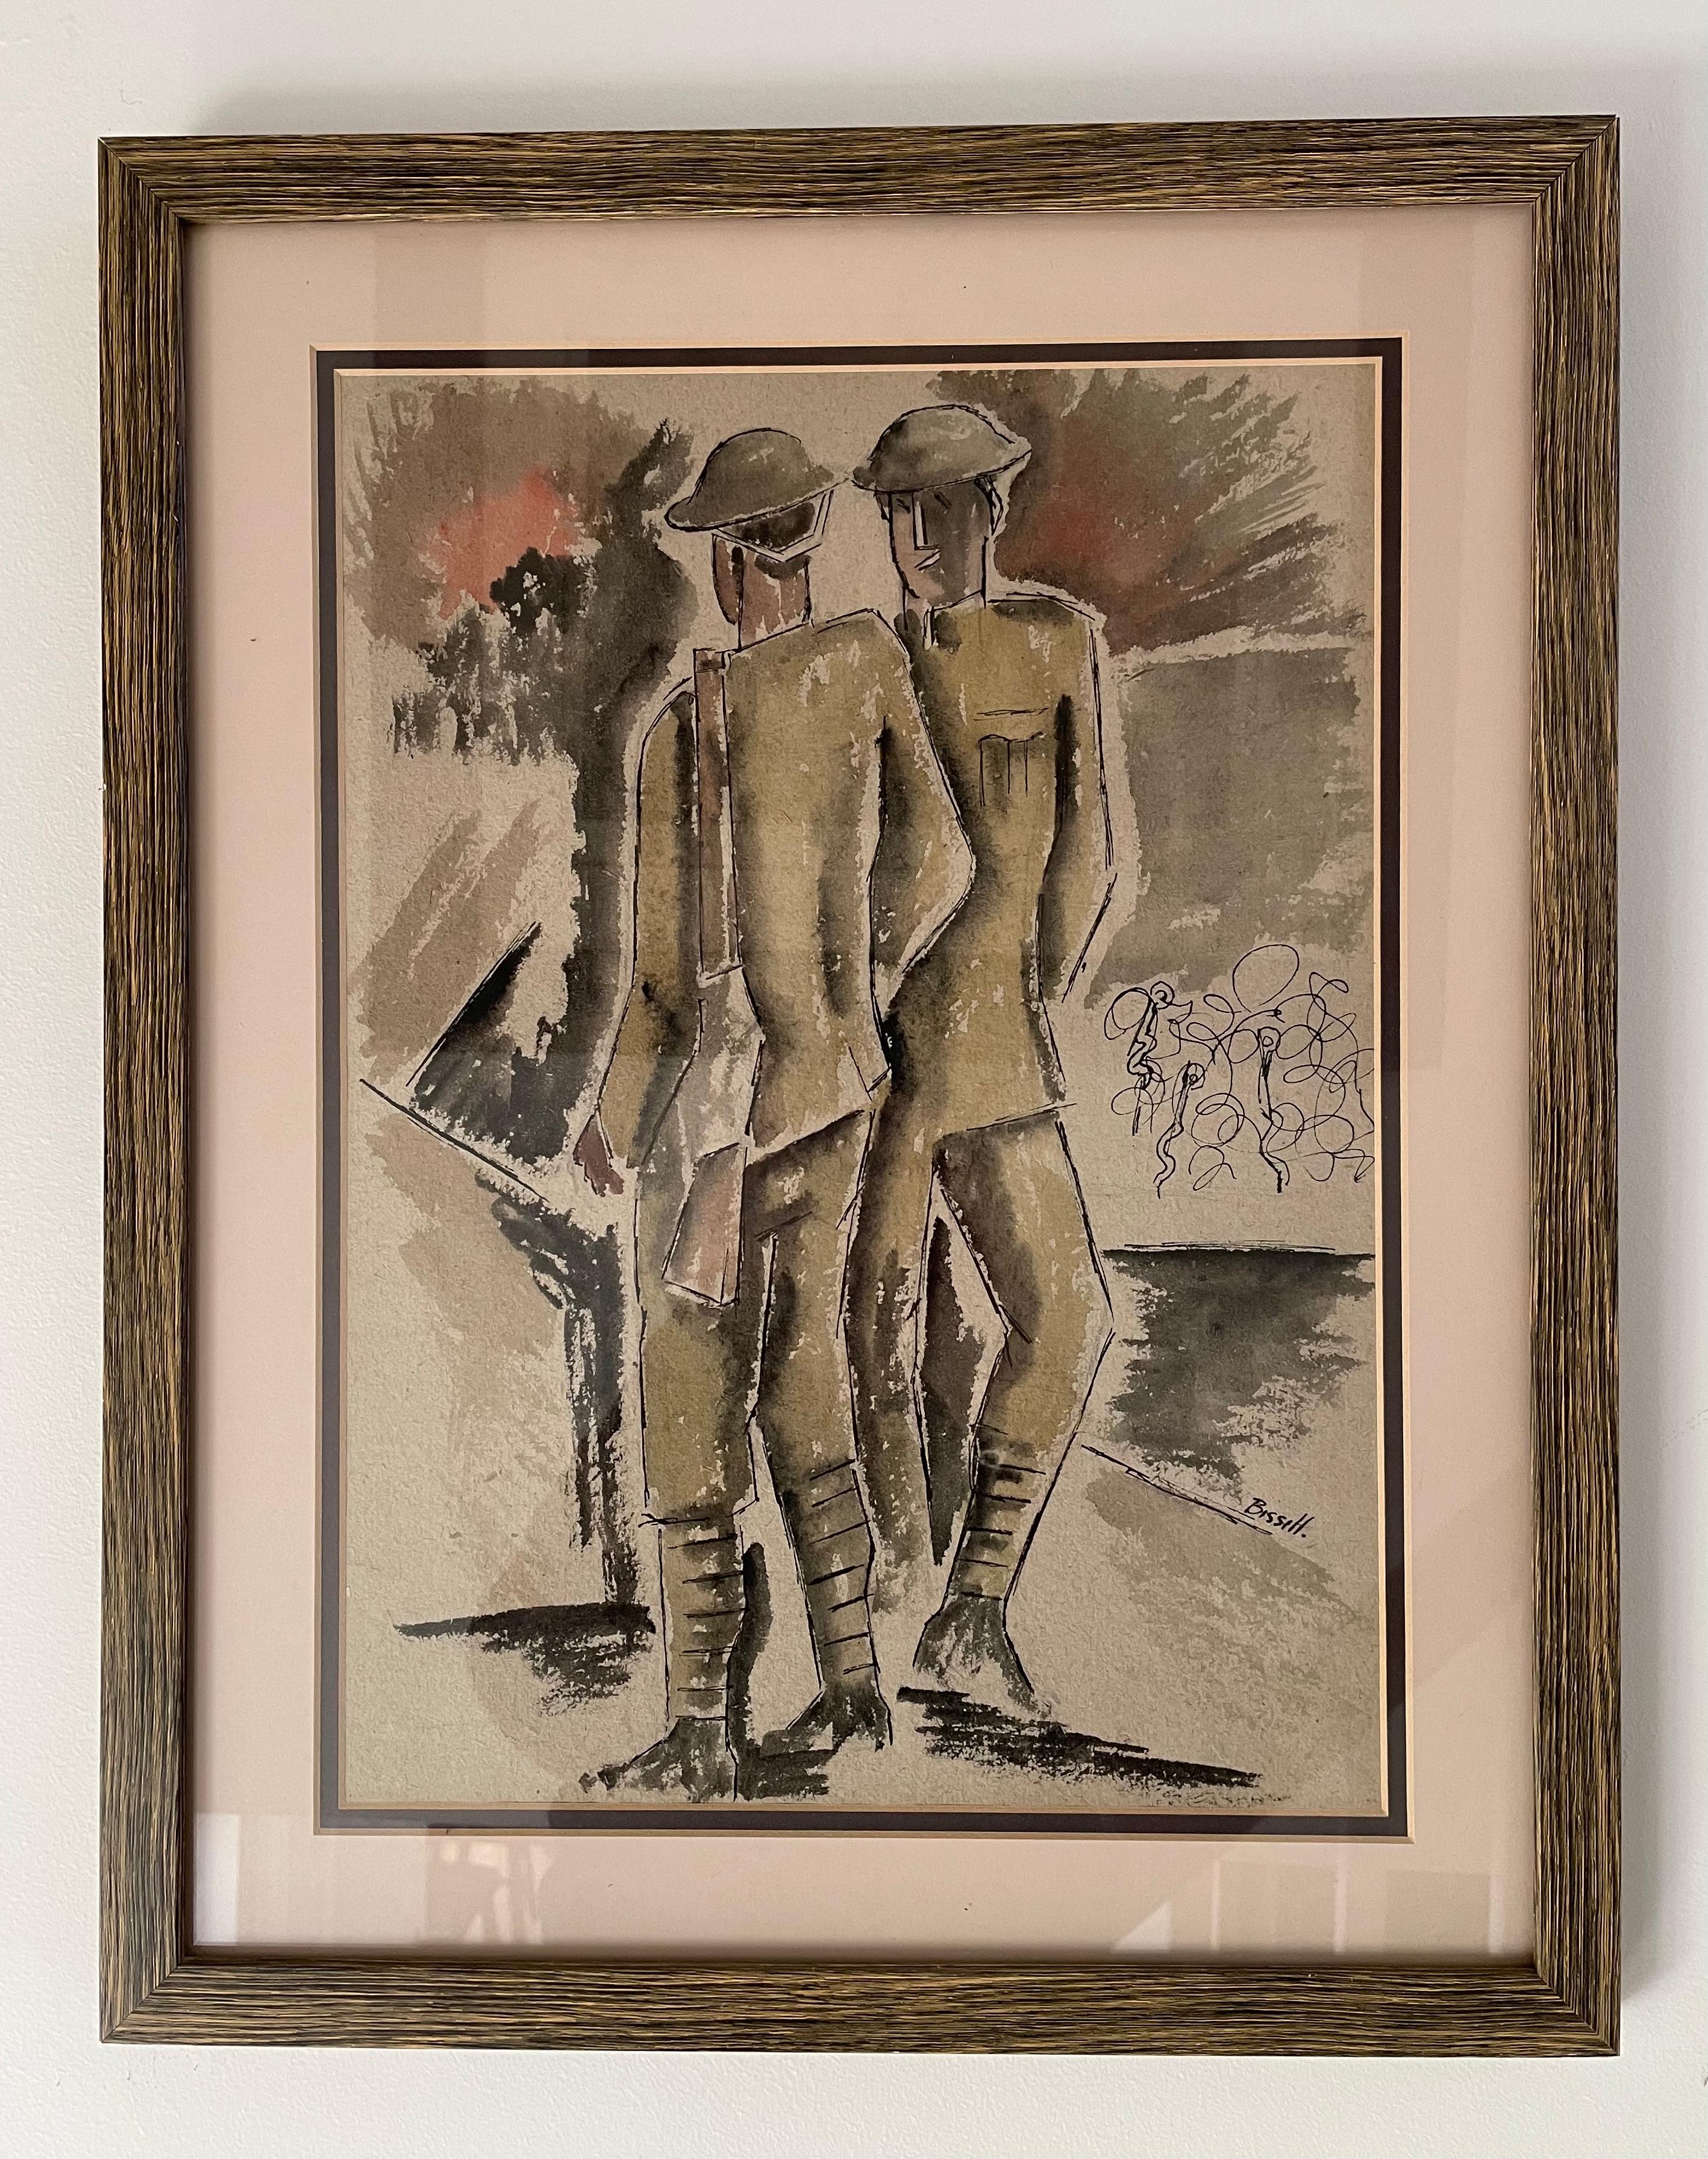 GEORGE BISSILL
(1896-1973)

Two Soldiers

Signed l.r.: Bissill
Watercolour and pen and ink on buff paper
Framed

38.5 by 28 cm., 15 ¼ by 11 in.
(frame size 51 by 40.5 cm., 20 by 16 in.)

Provenance:
The artist’s estate;
Kate Pattinson, the artist’s